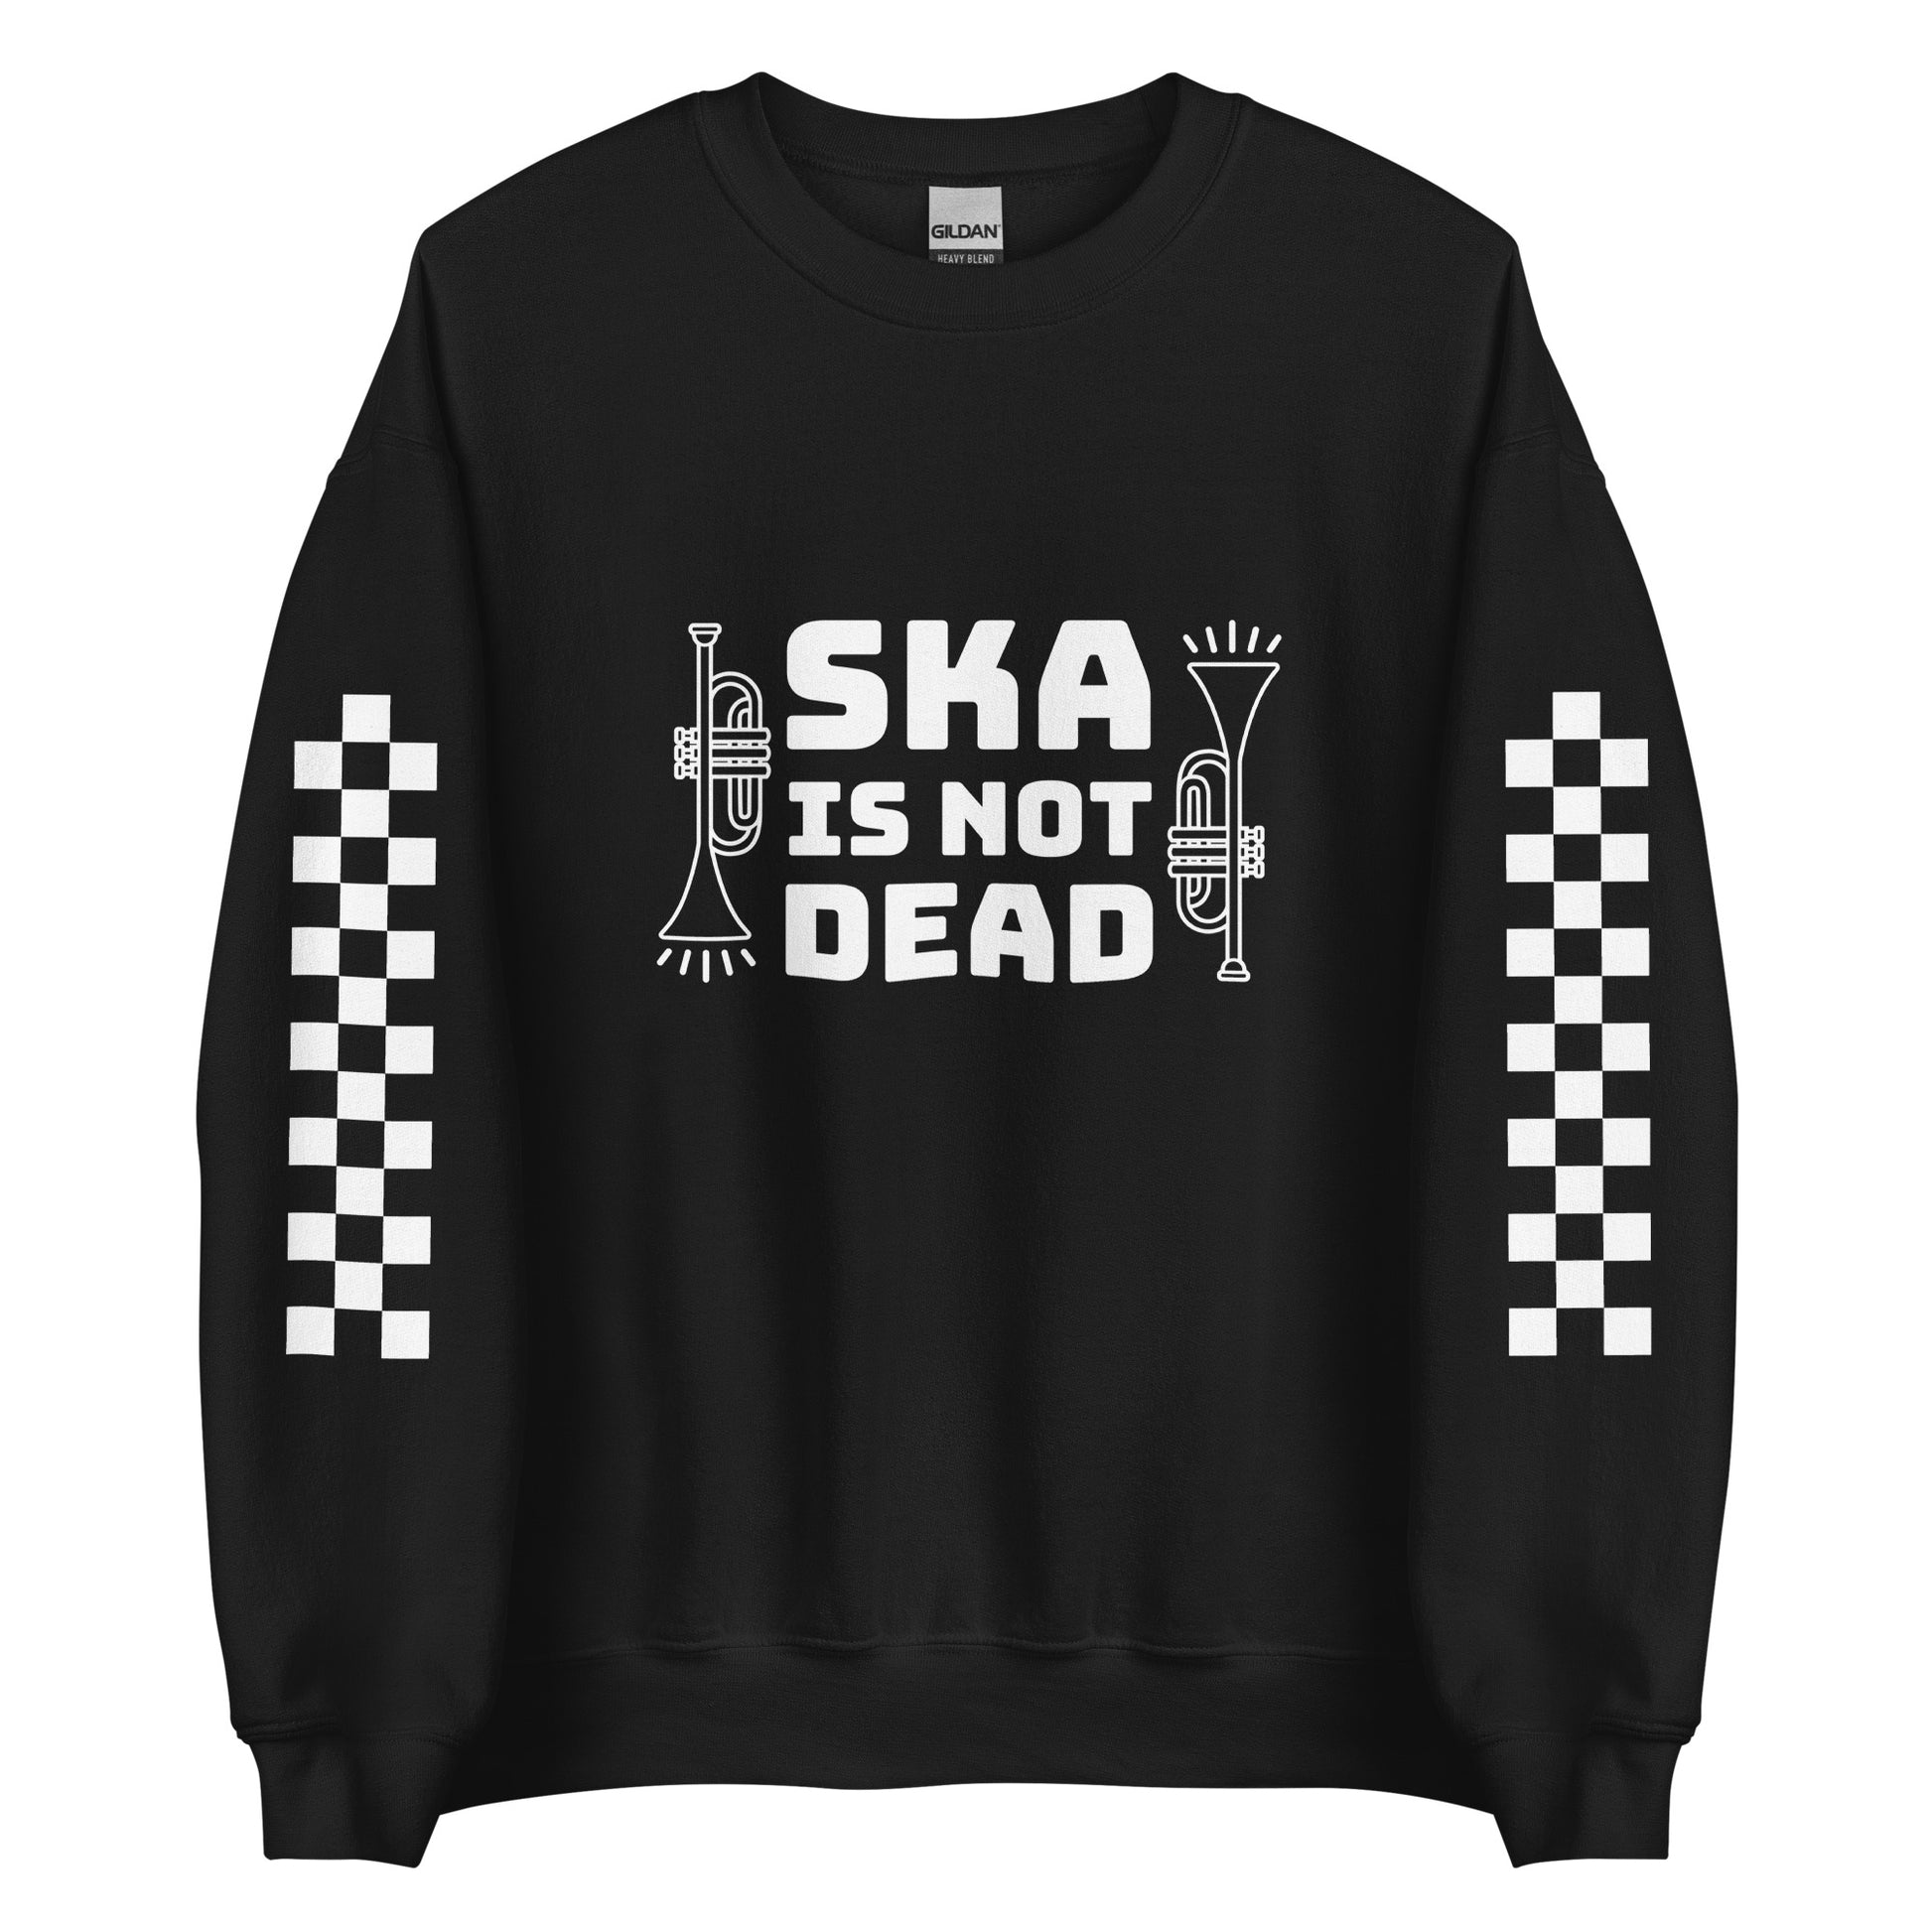 A black crewneck sweatshirt featuring an illustration of two trumpets on either side of text that reads "Ska is not dead". The sleeves feature a panel of black and white checkered pattern.